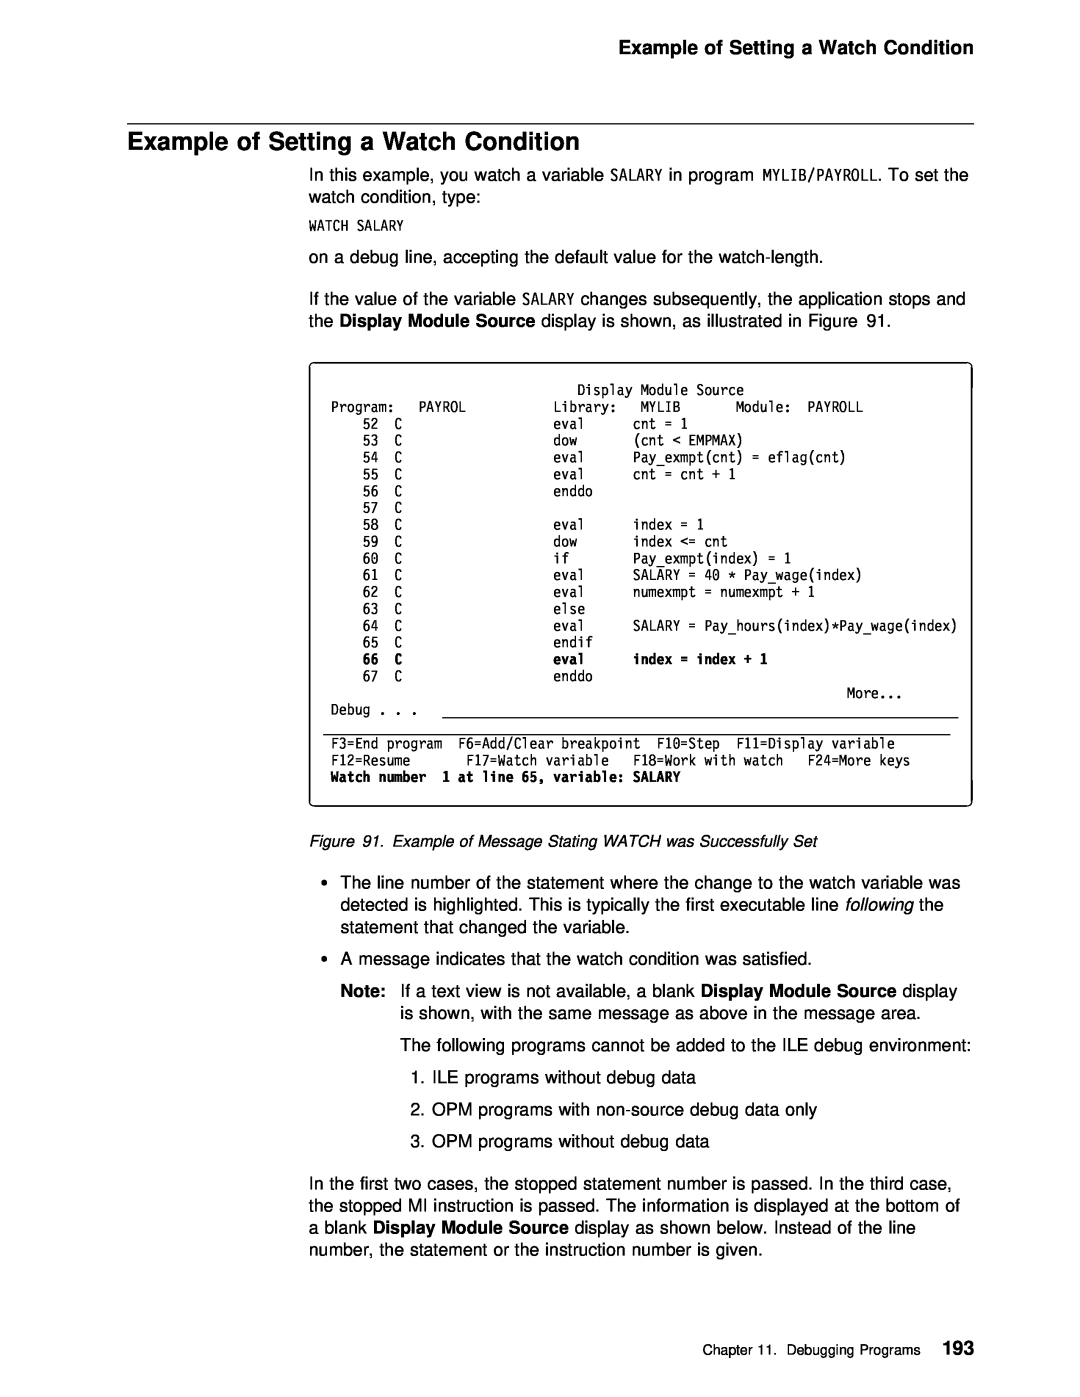 IBM AS/400 manual Example of Setting a Watch Condition 